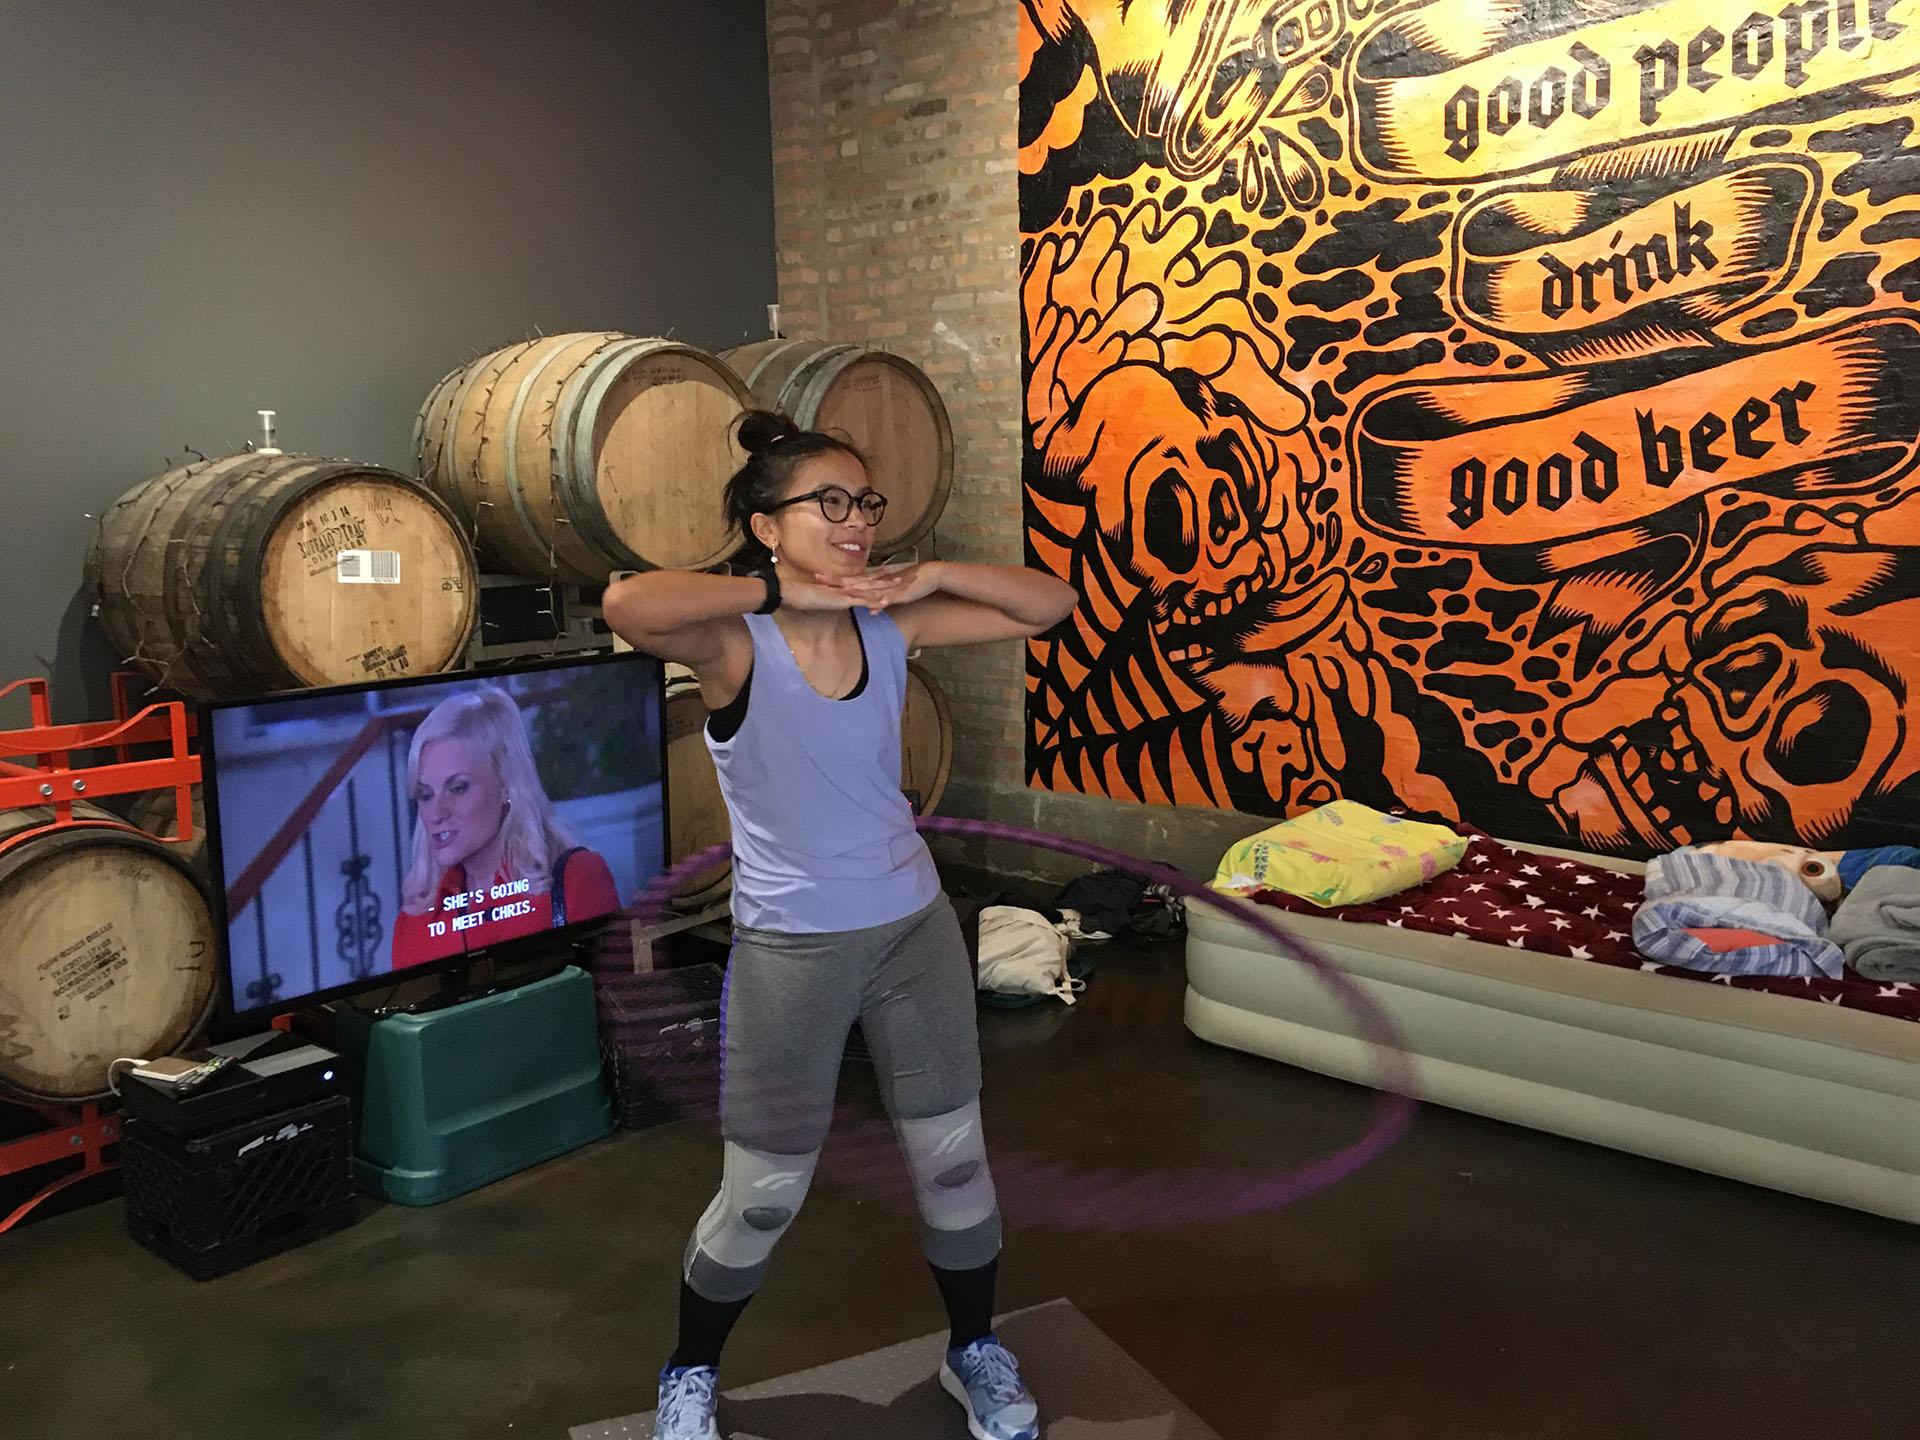 Wicker Park resident Jenny Doan poses for a picture Saturday Nov. 23 as she nears the end of her Guinness World Record attempt for longest marathon hula-hooping session. (Kristen Thometz / WTTW News)